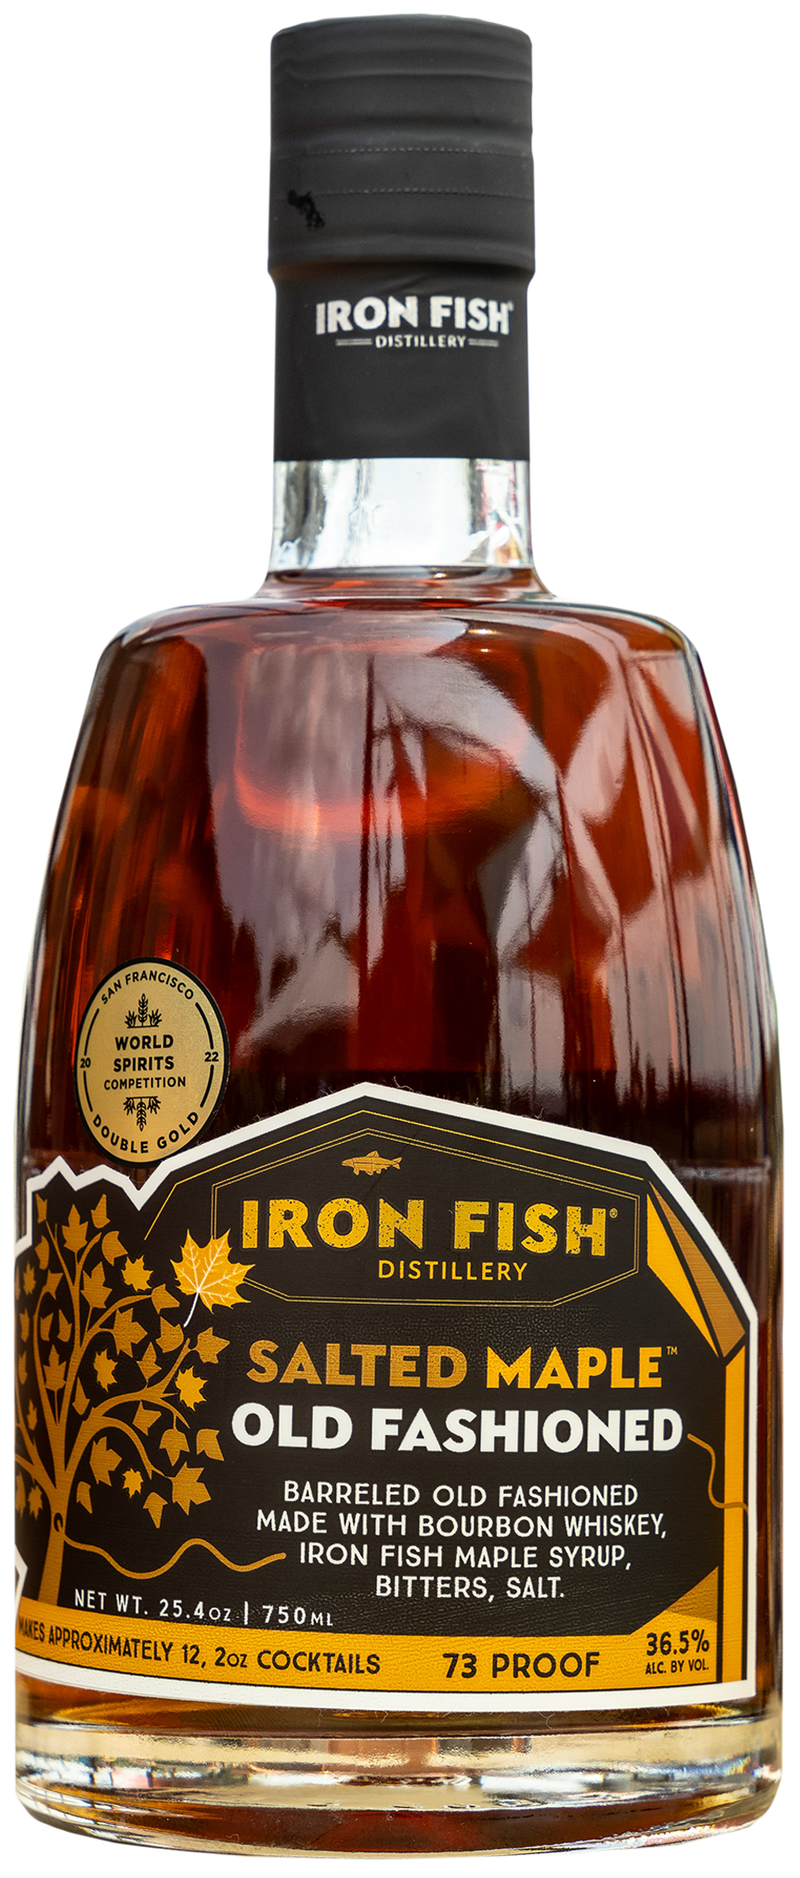 Iron Fish Salted Maple Old Fashioned (750ml)